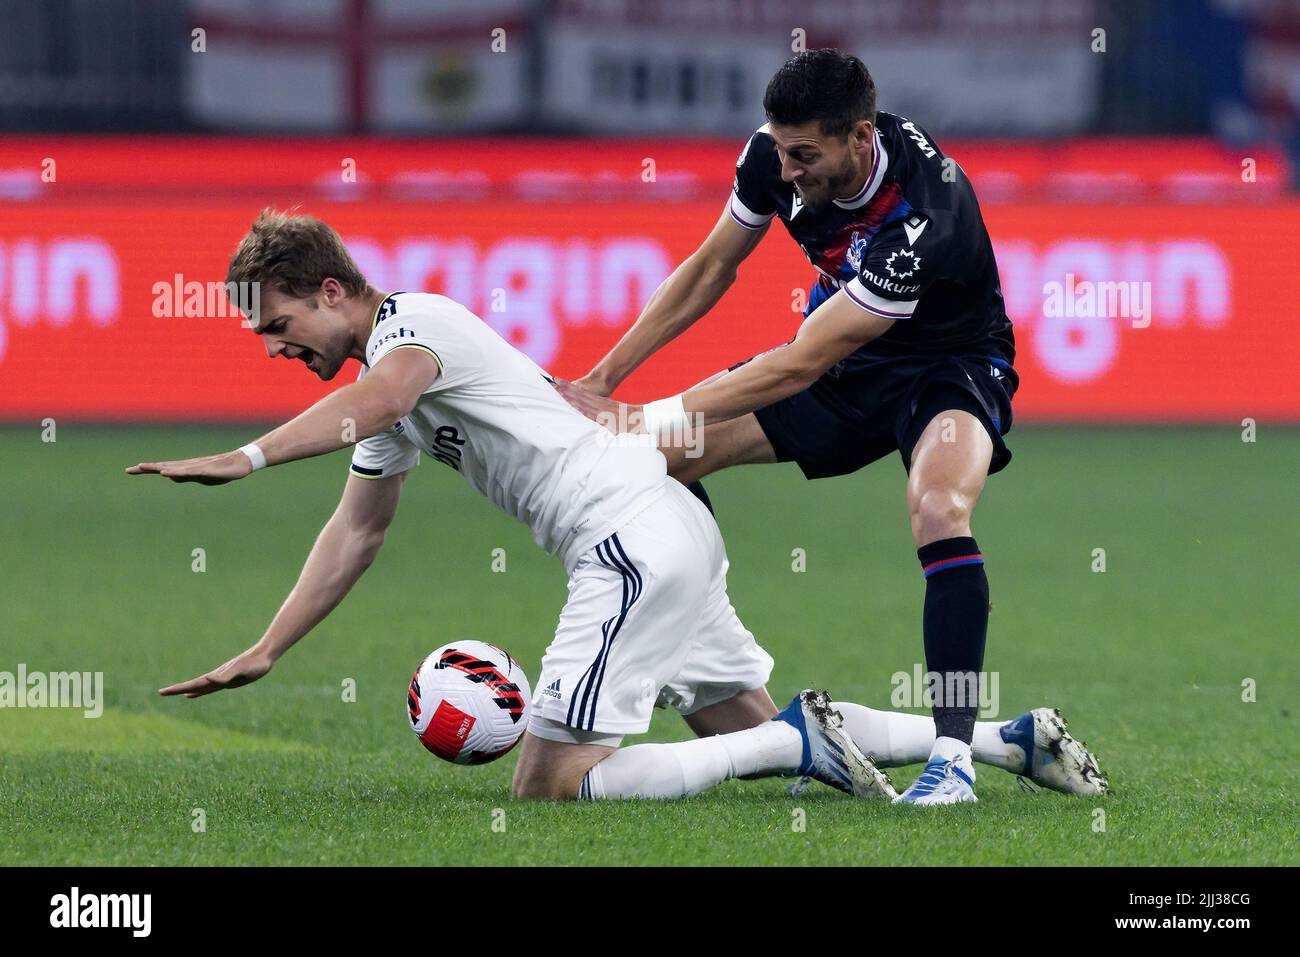 Perth, Australia, 22 July, 2022. Patrick Bamford of Leeds United is tackled by Joel Ward of Crystal Palace during the ICON Festival of International Football match between Crystal Palace and Leeds United at Optus Stadium on July 22, 2022 in Perth, Australia. Credit: Graham Conaty/Speed Media/Alamy Live News Stock Photo